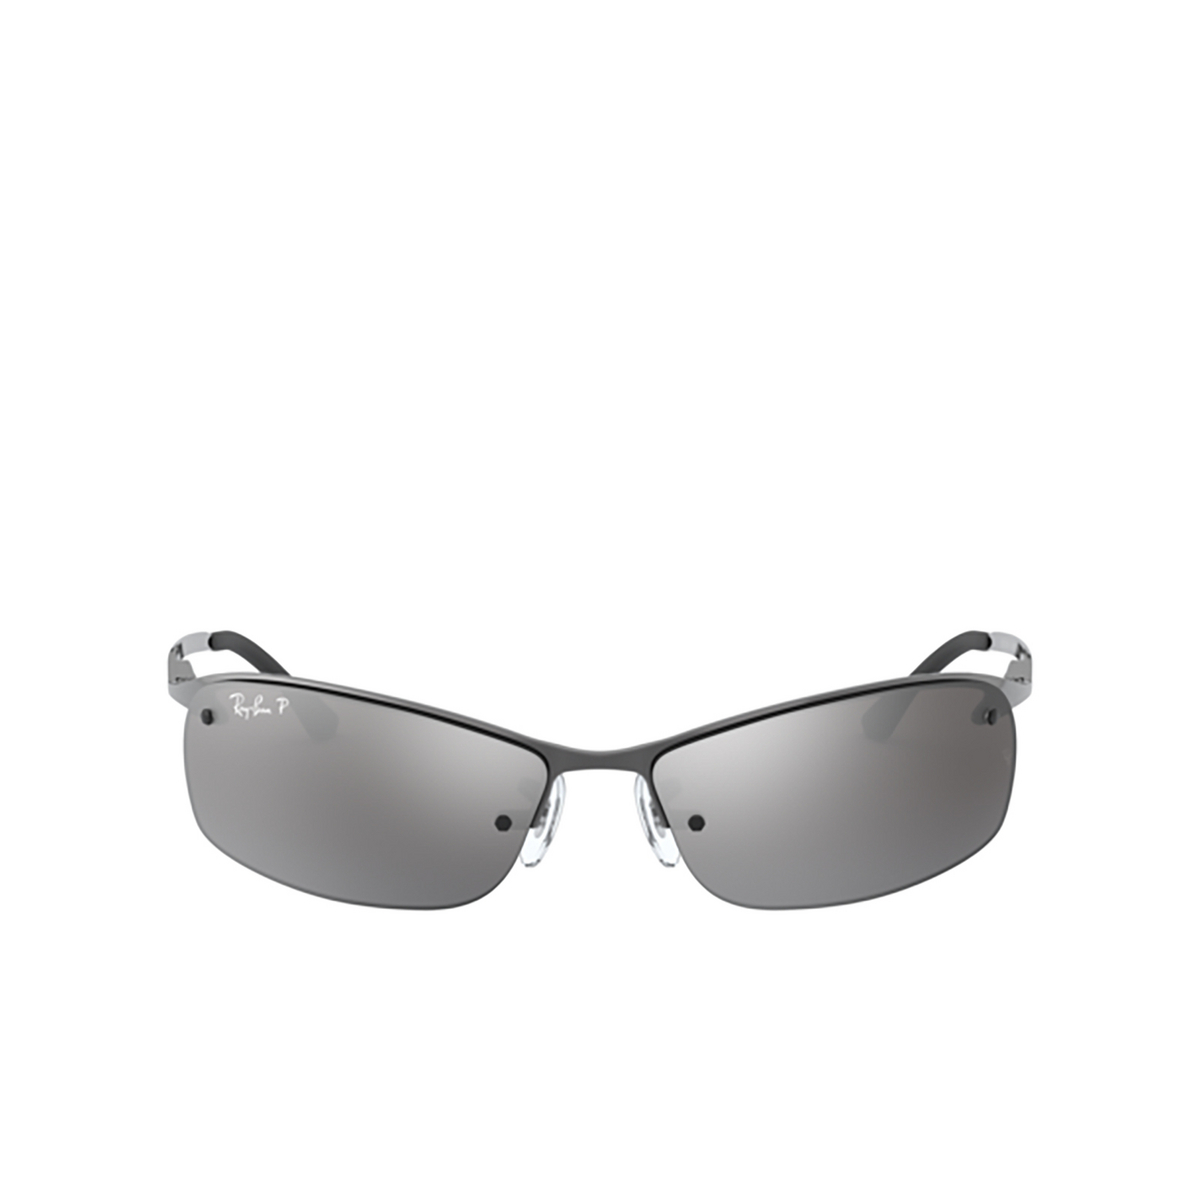 Ray-Ban RB3183 Sunglasses 004/82 GUNMETAL - front view